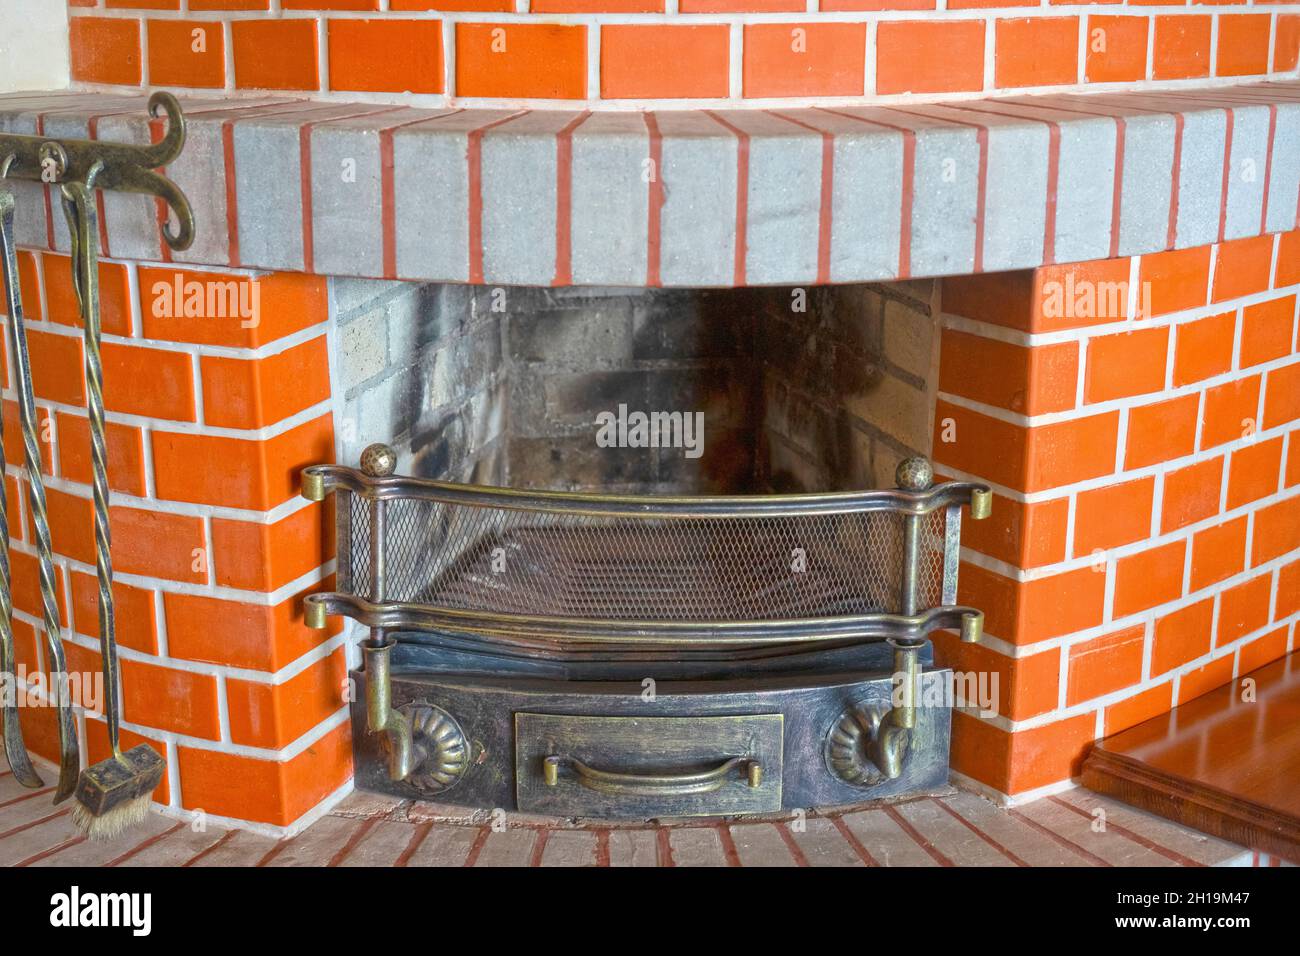 Large red brick fireplace in the interior. Stock Photo